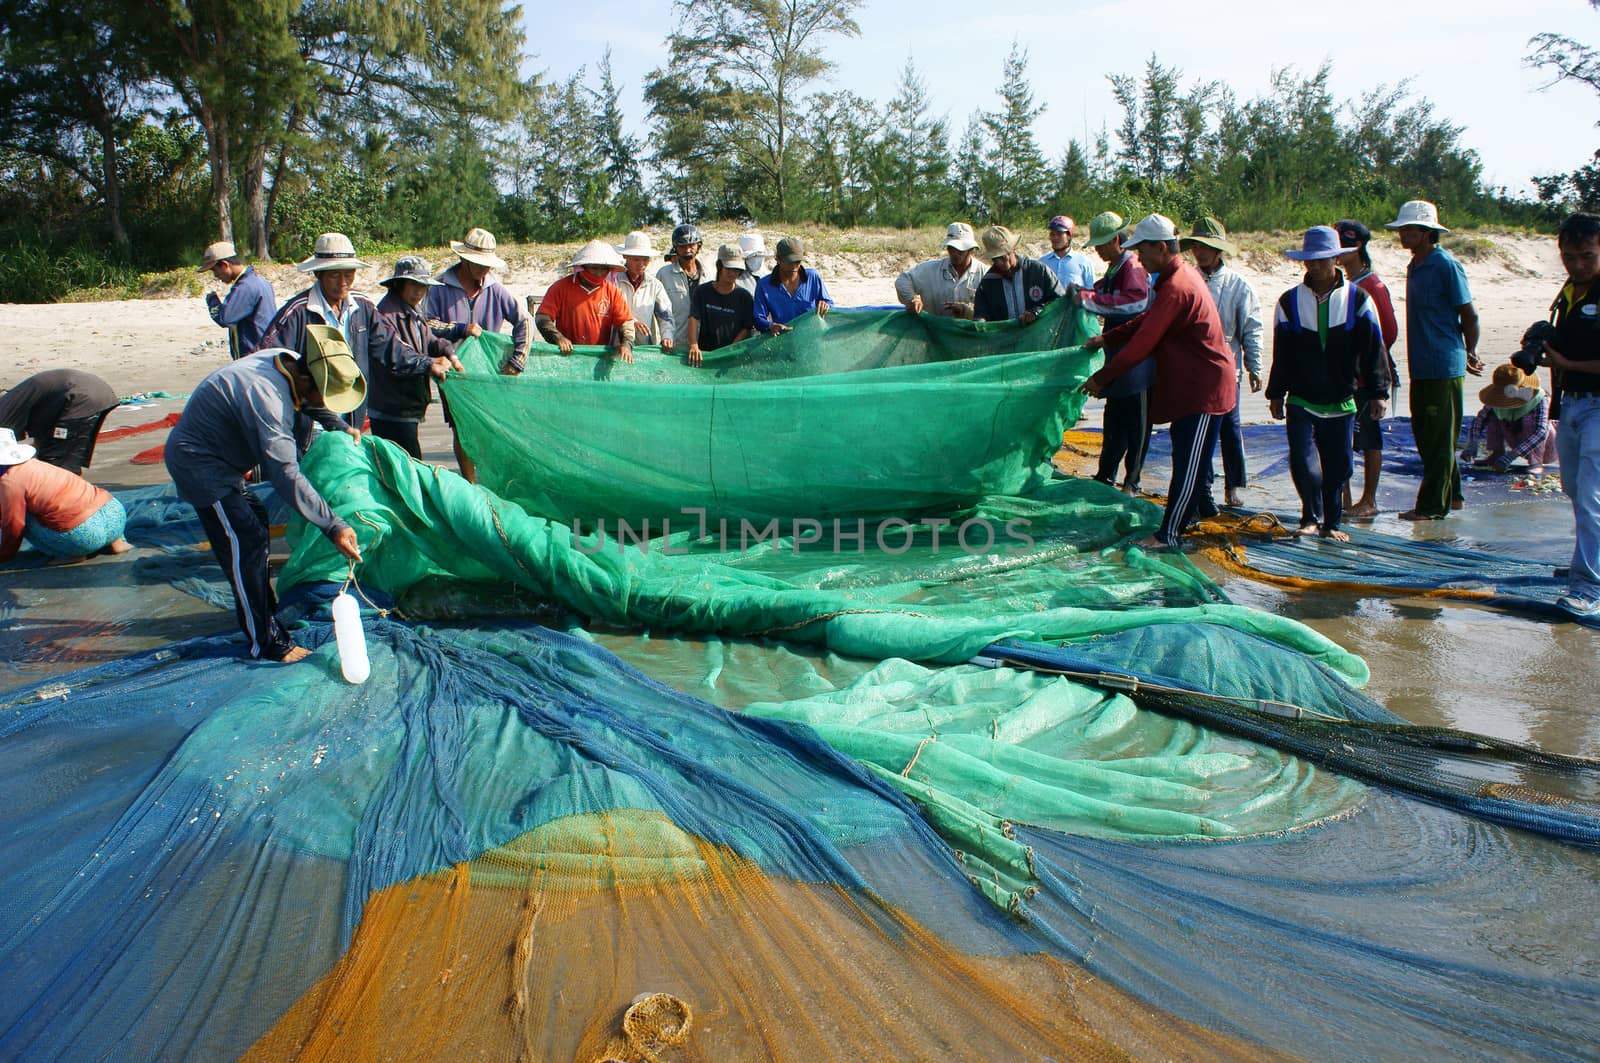 BINH THUAN, VIETNAM- JAN 22: Crowded atmosphere on beach with impression 's group of fisherman pull fish net, row of people with long net in hand, Viet Nam, Jan 22, 2014                           